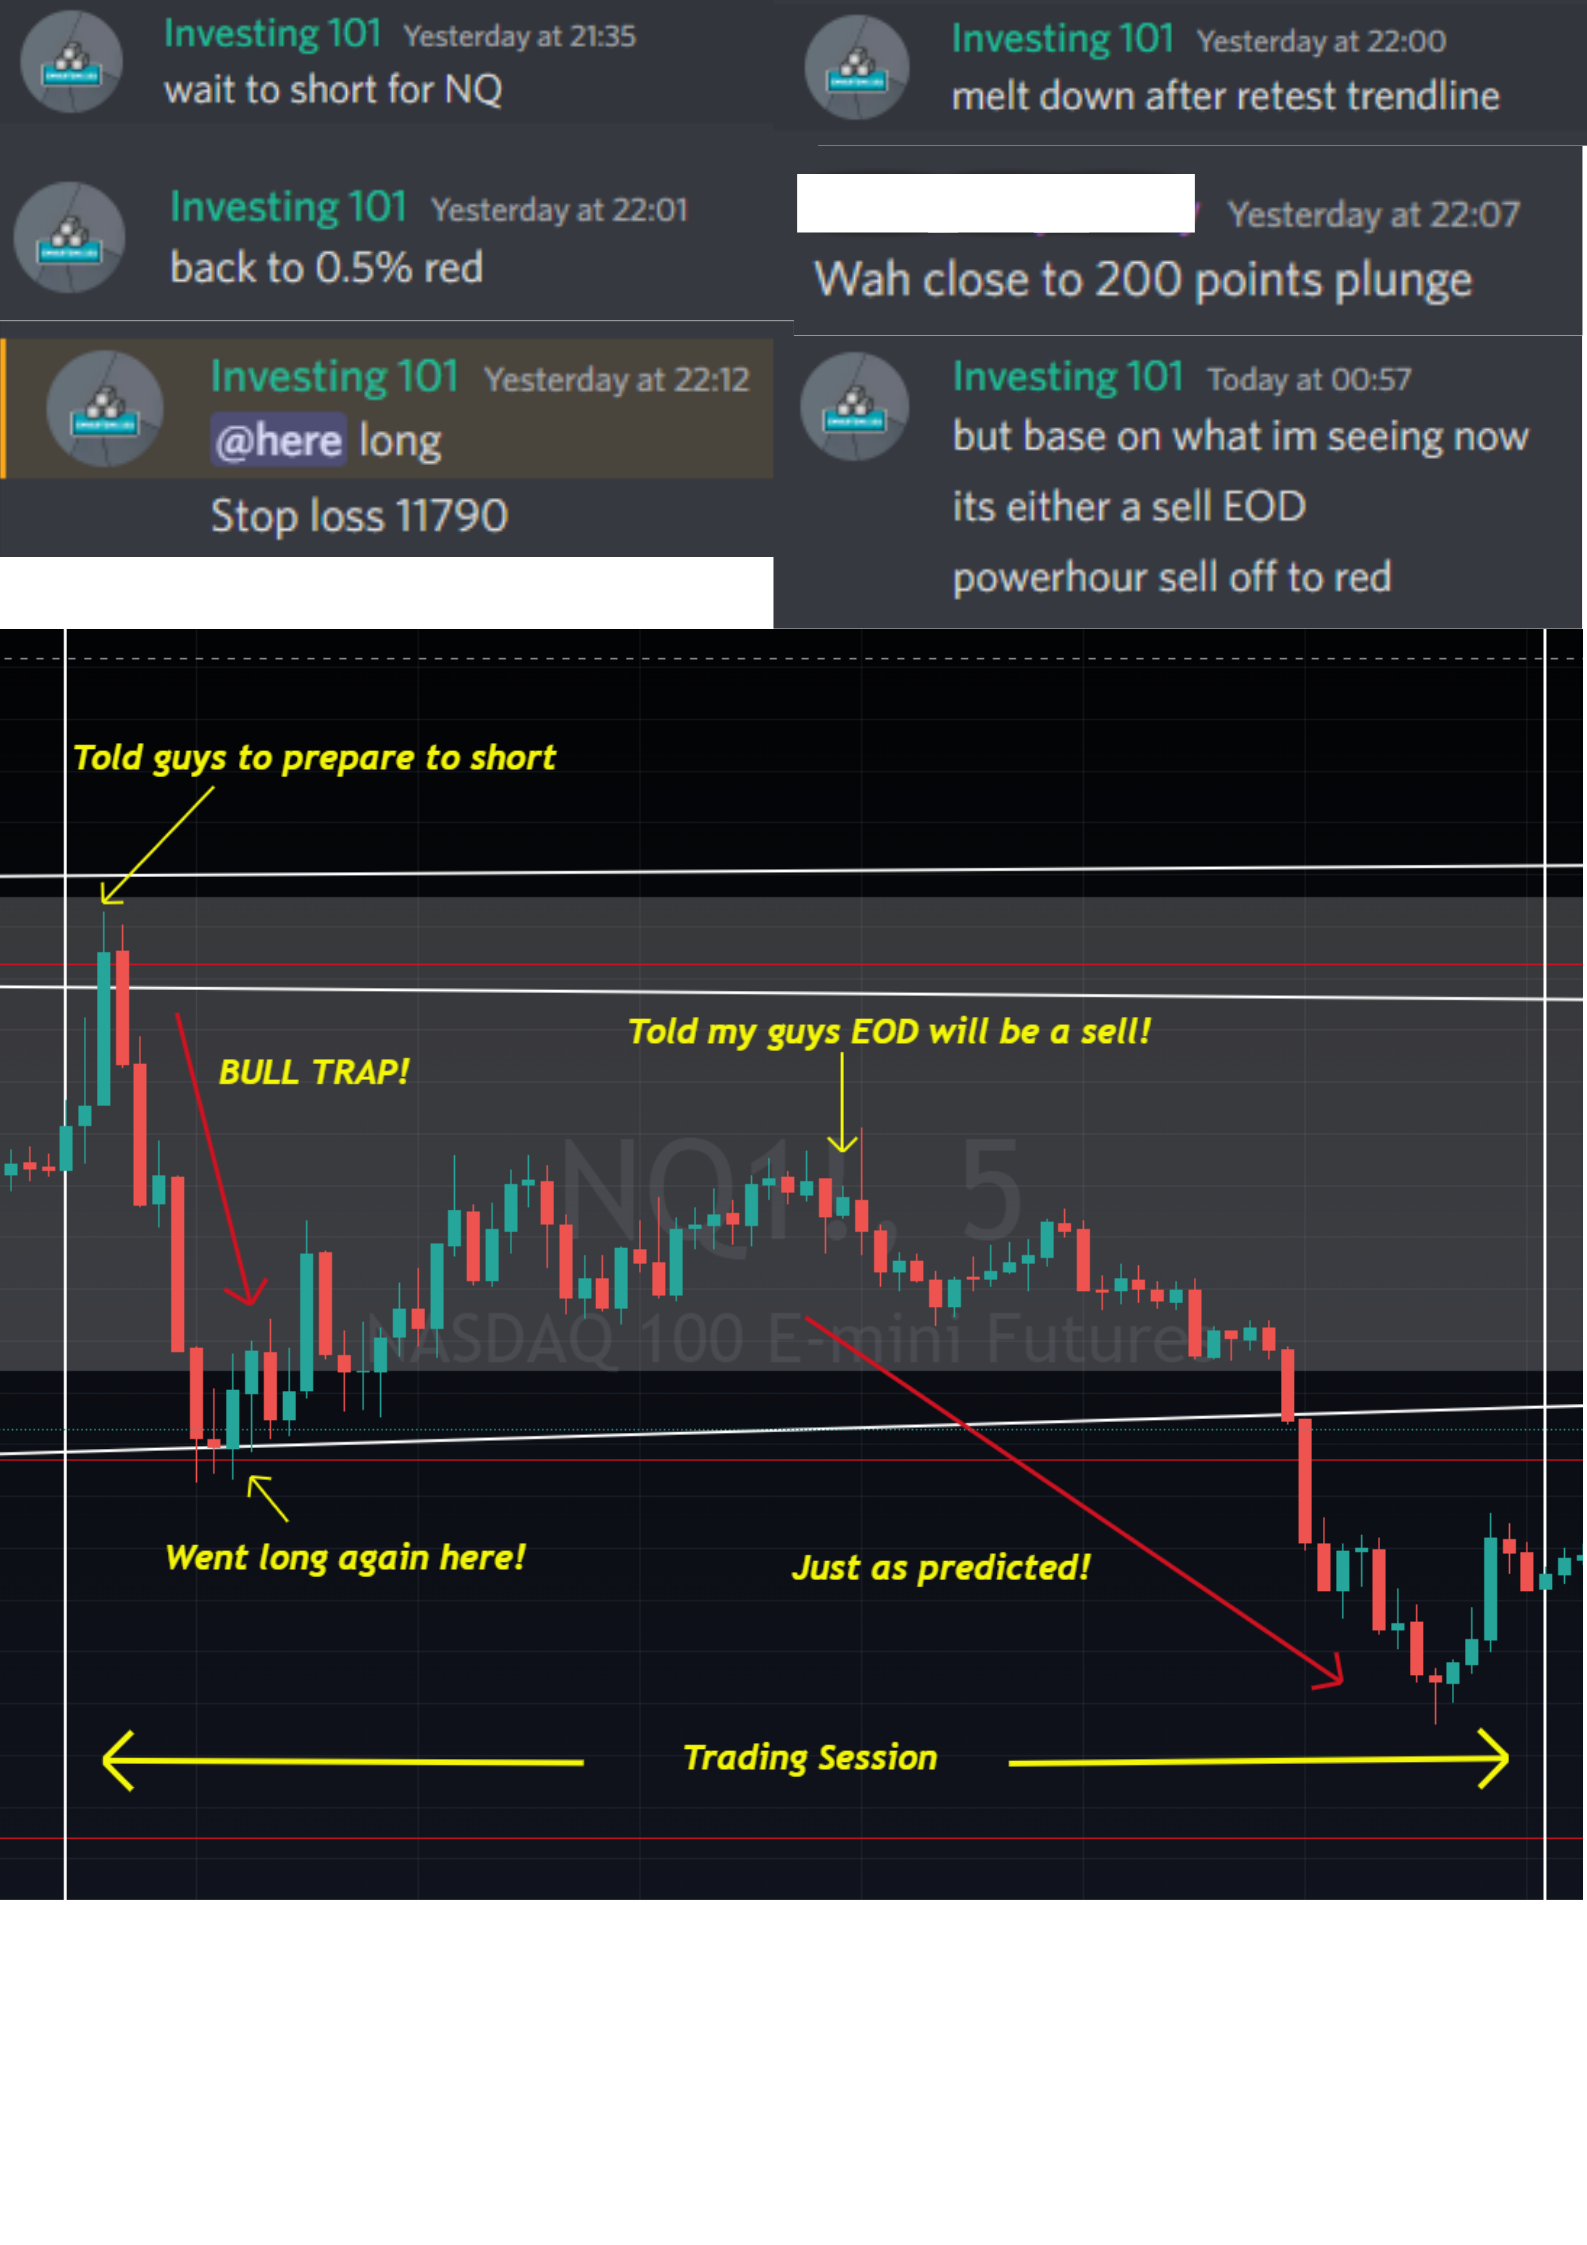 Yesterday early day, Bulls were trapped, AGAIN! Short pop to trap bulls, then a huge plunge down! Fortunately, we caught every single move! Today we will have C...